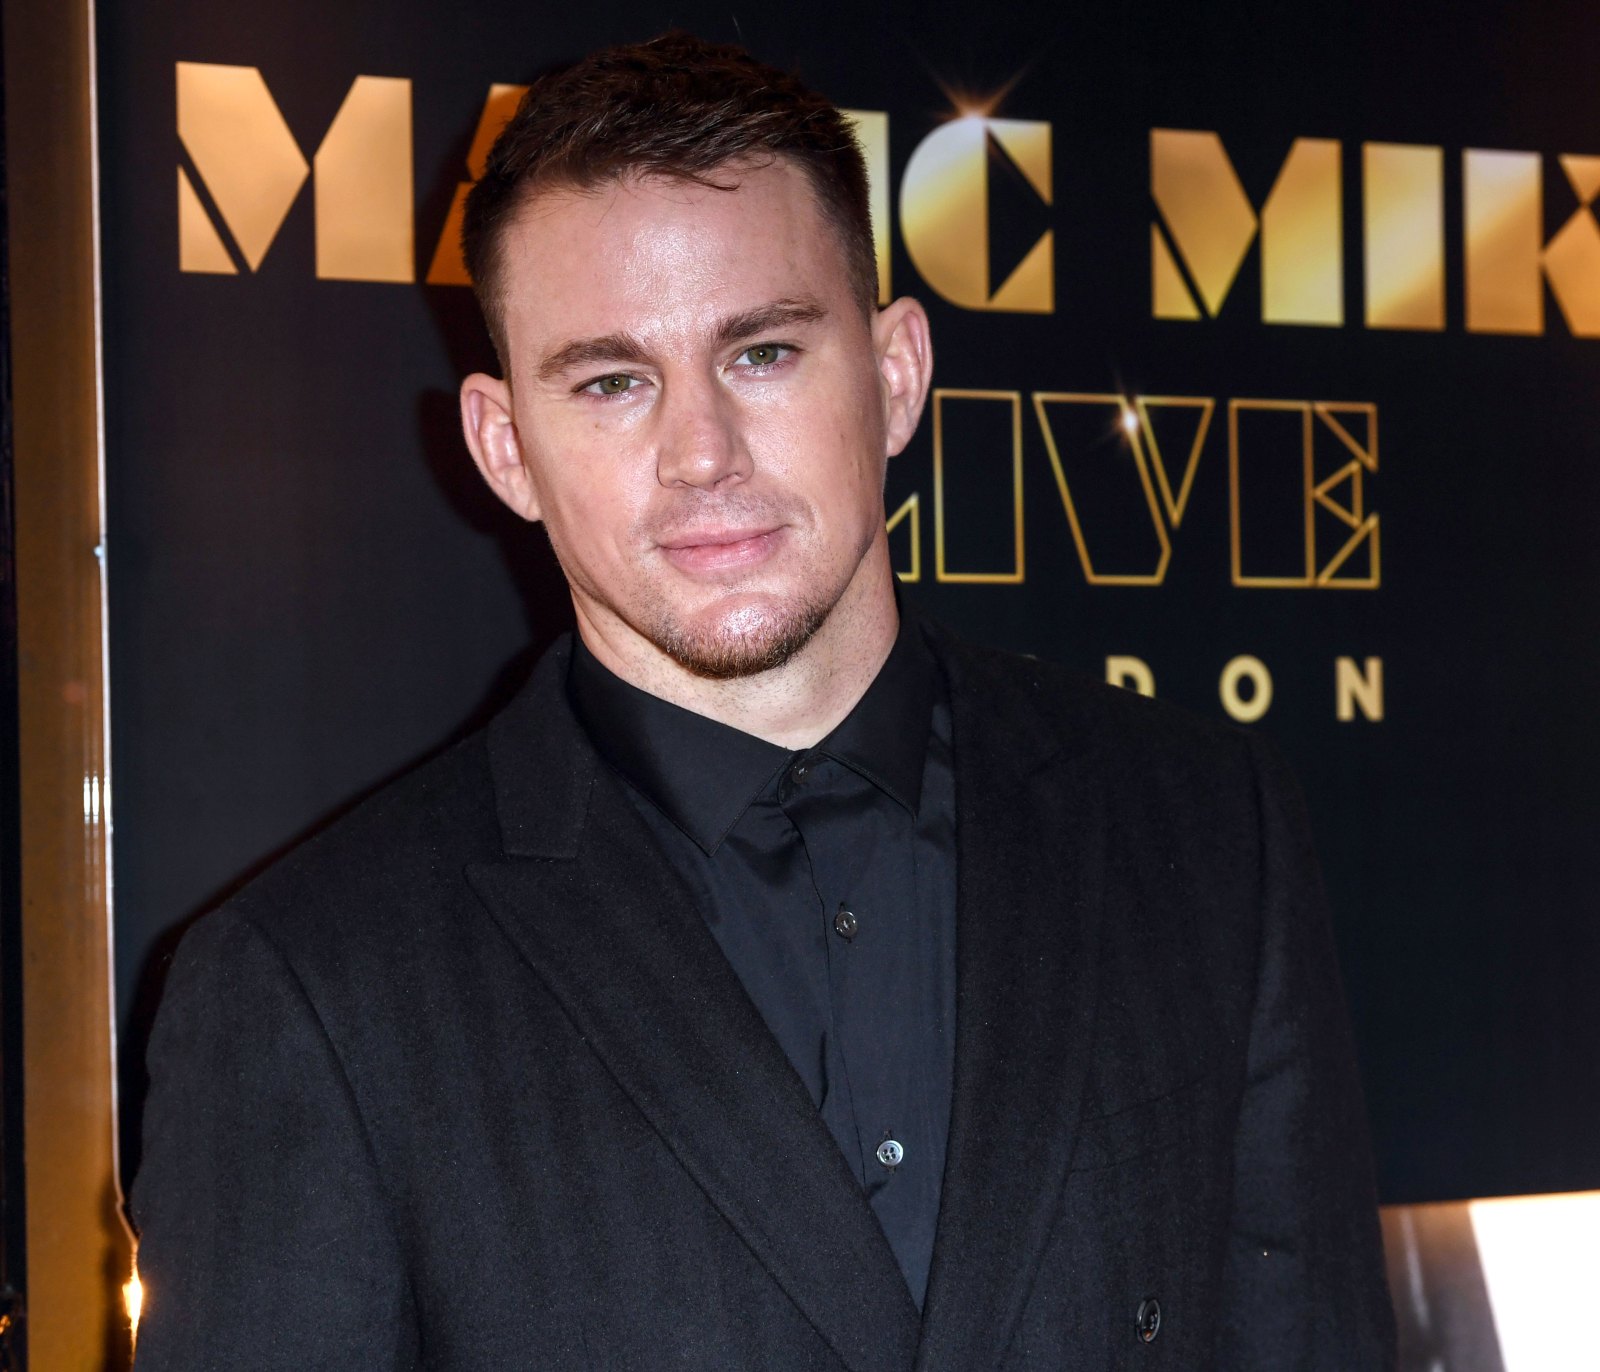 Channing Tatum Returns to Instagram to Share Photos From Las Vegas Trip With Daughter Everly